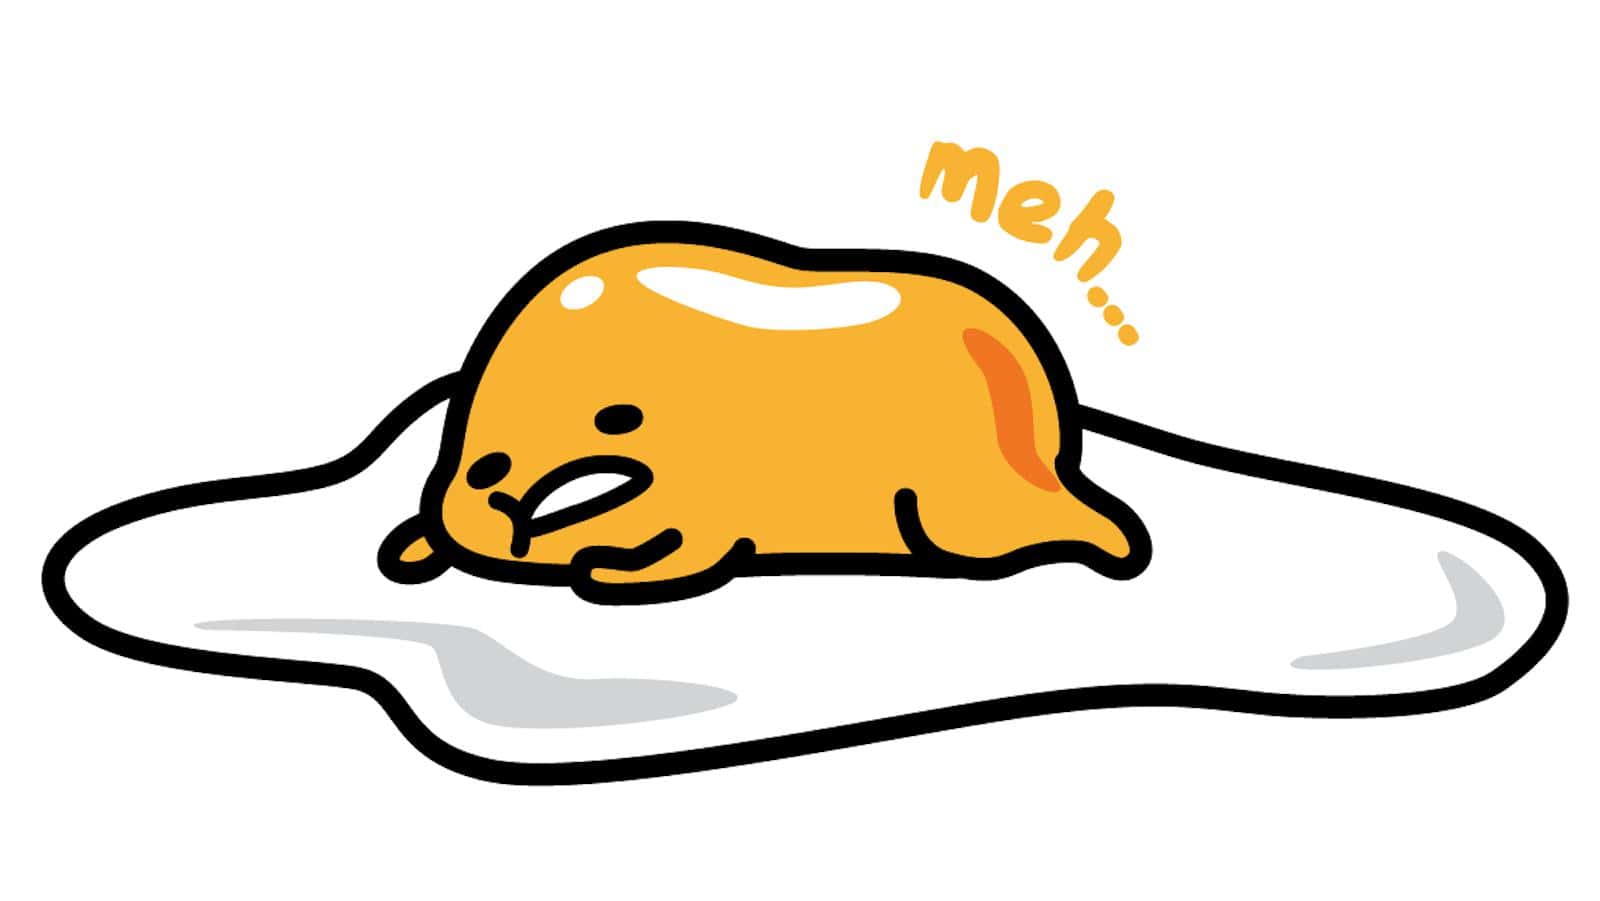 An illustration of a cartoon egg character lying on its side and looking unenthusiastic. - Gudetama